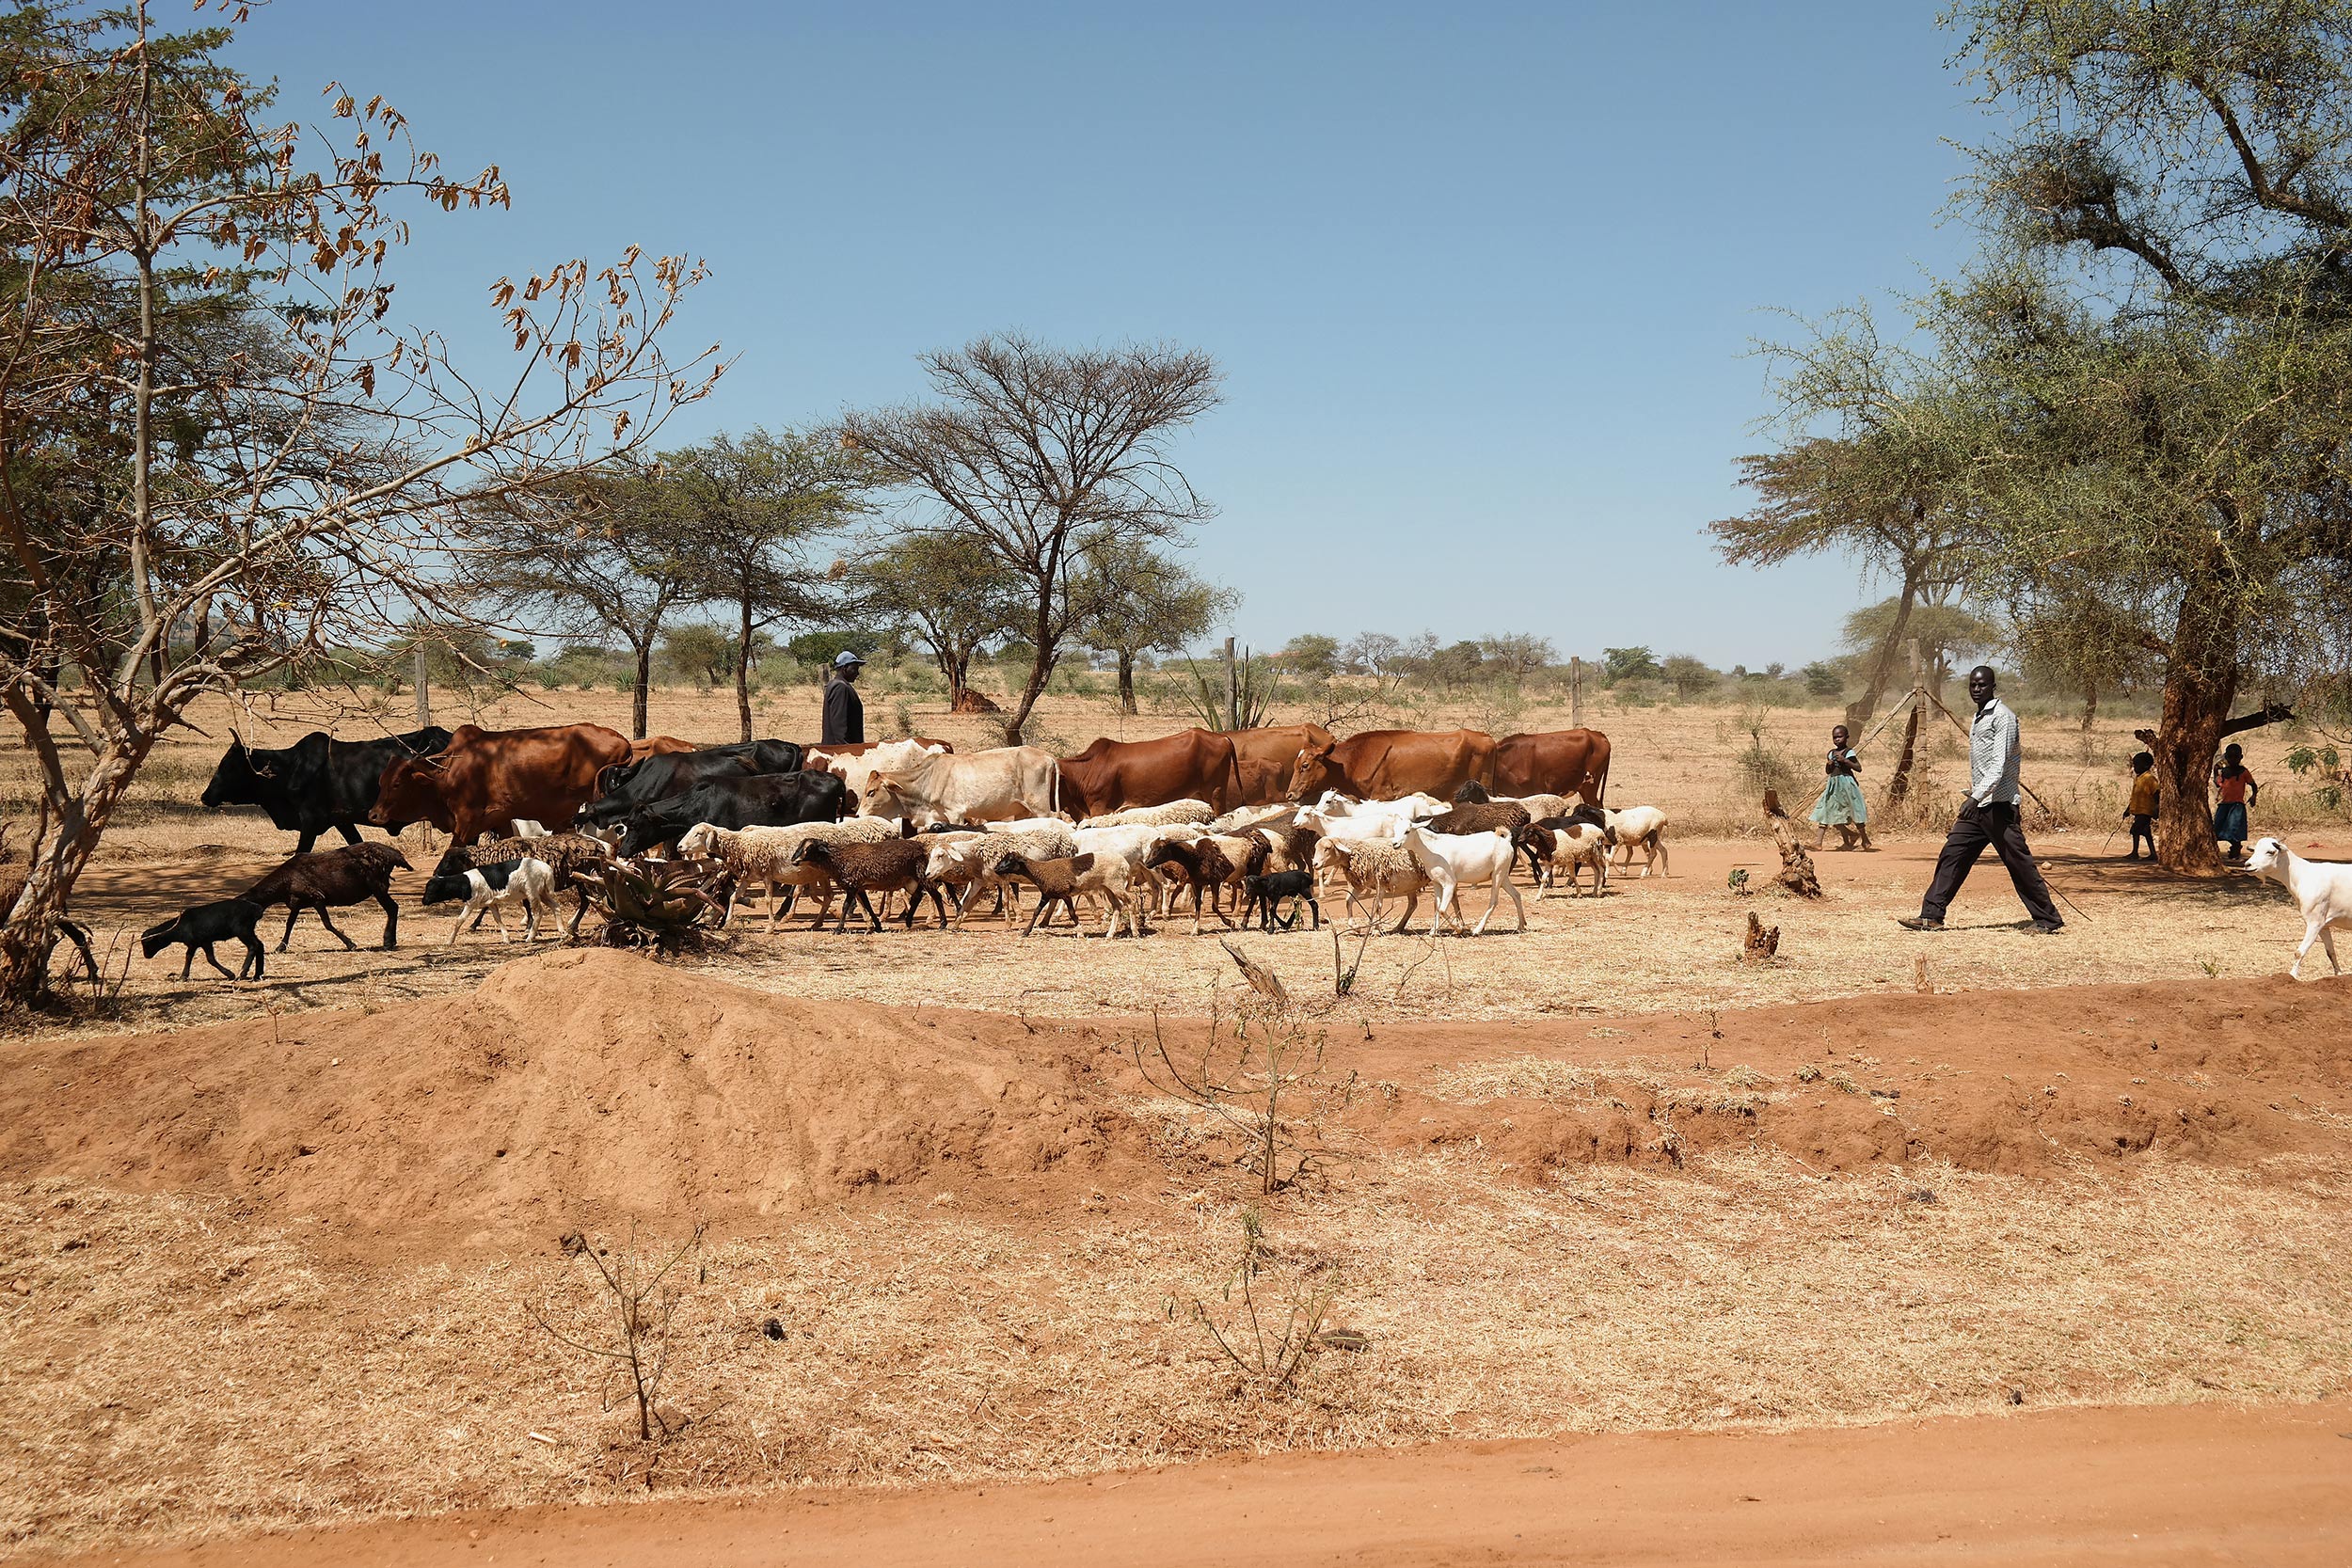 Livestock moving in a dry landscape